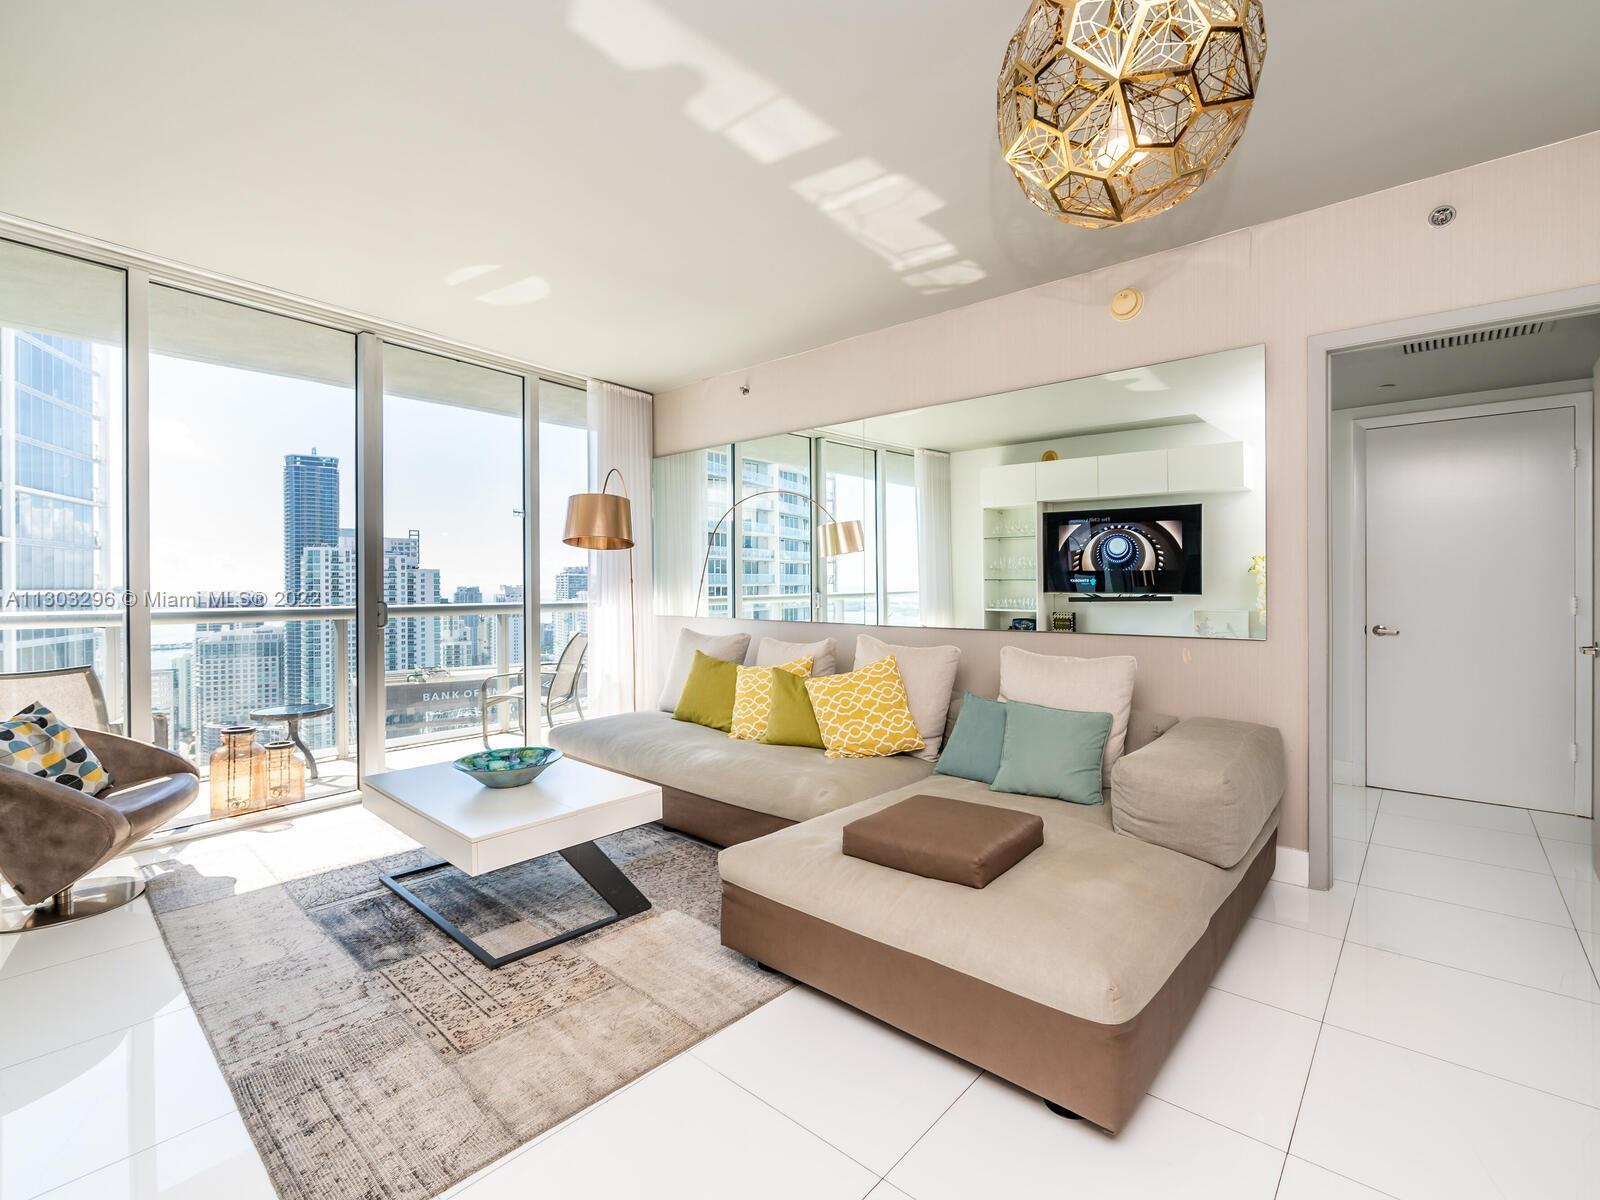 Splendid 2 bed 2 bath unit with breathtaking views of Miami skyline, River, bay and amenities deck, 